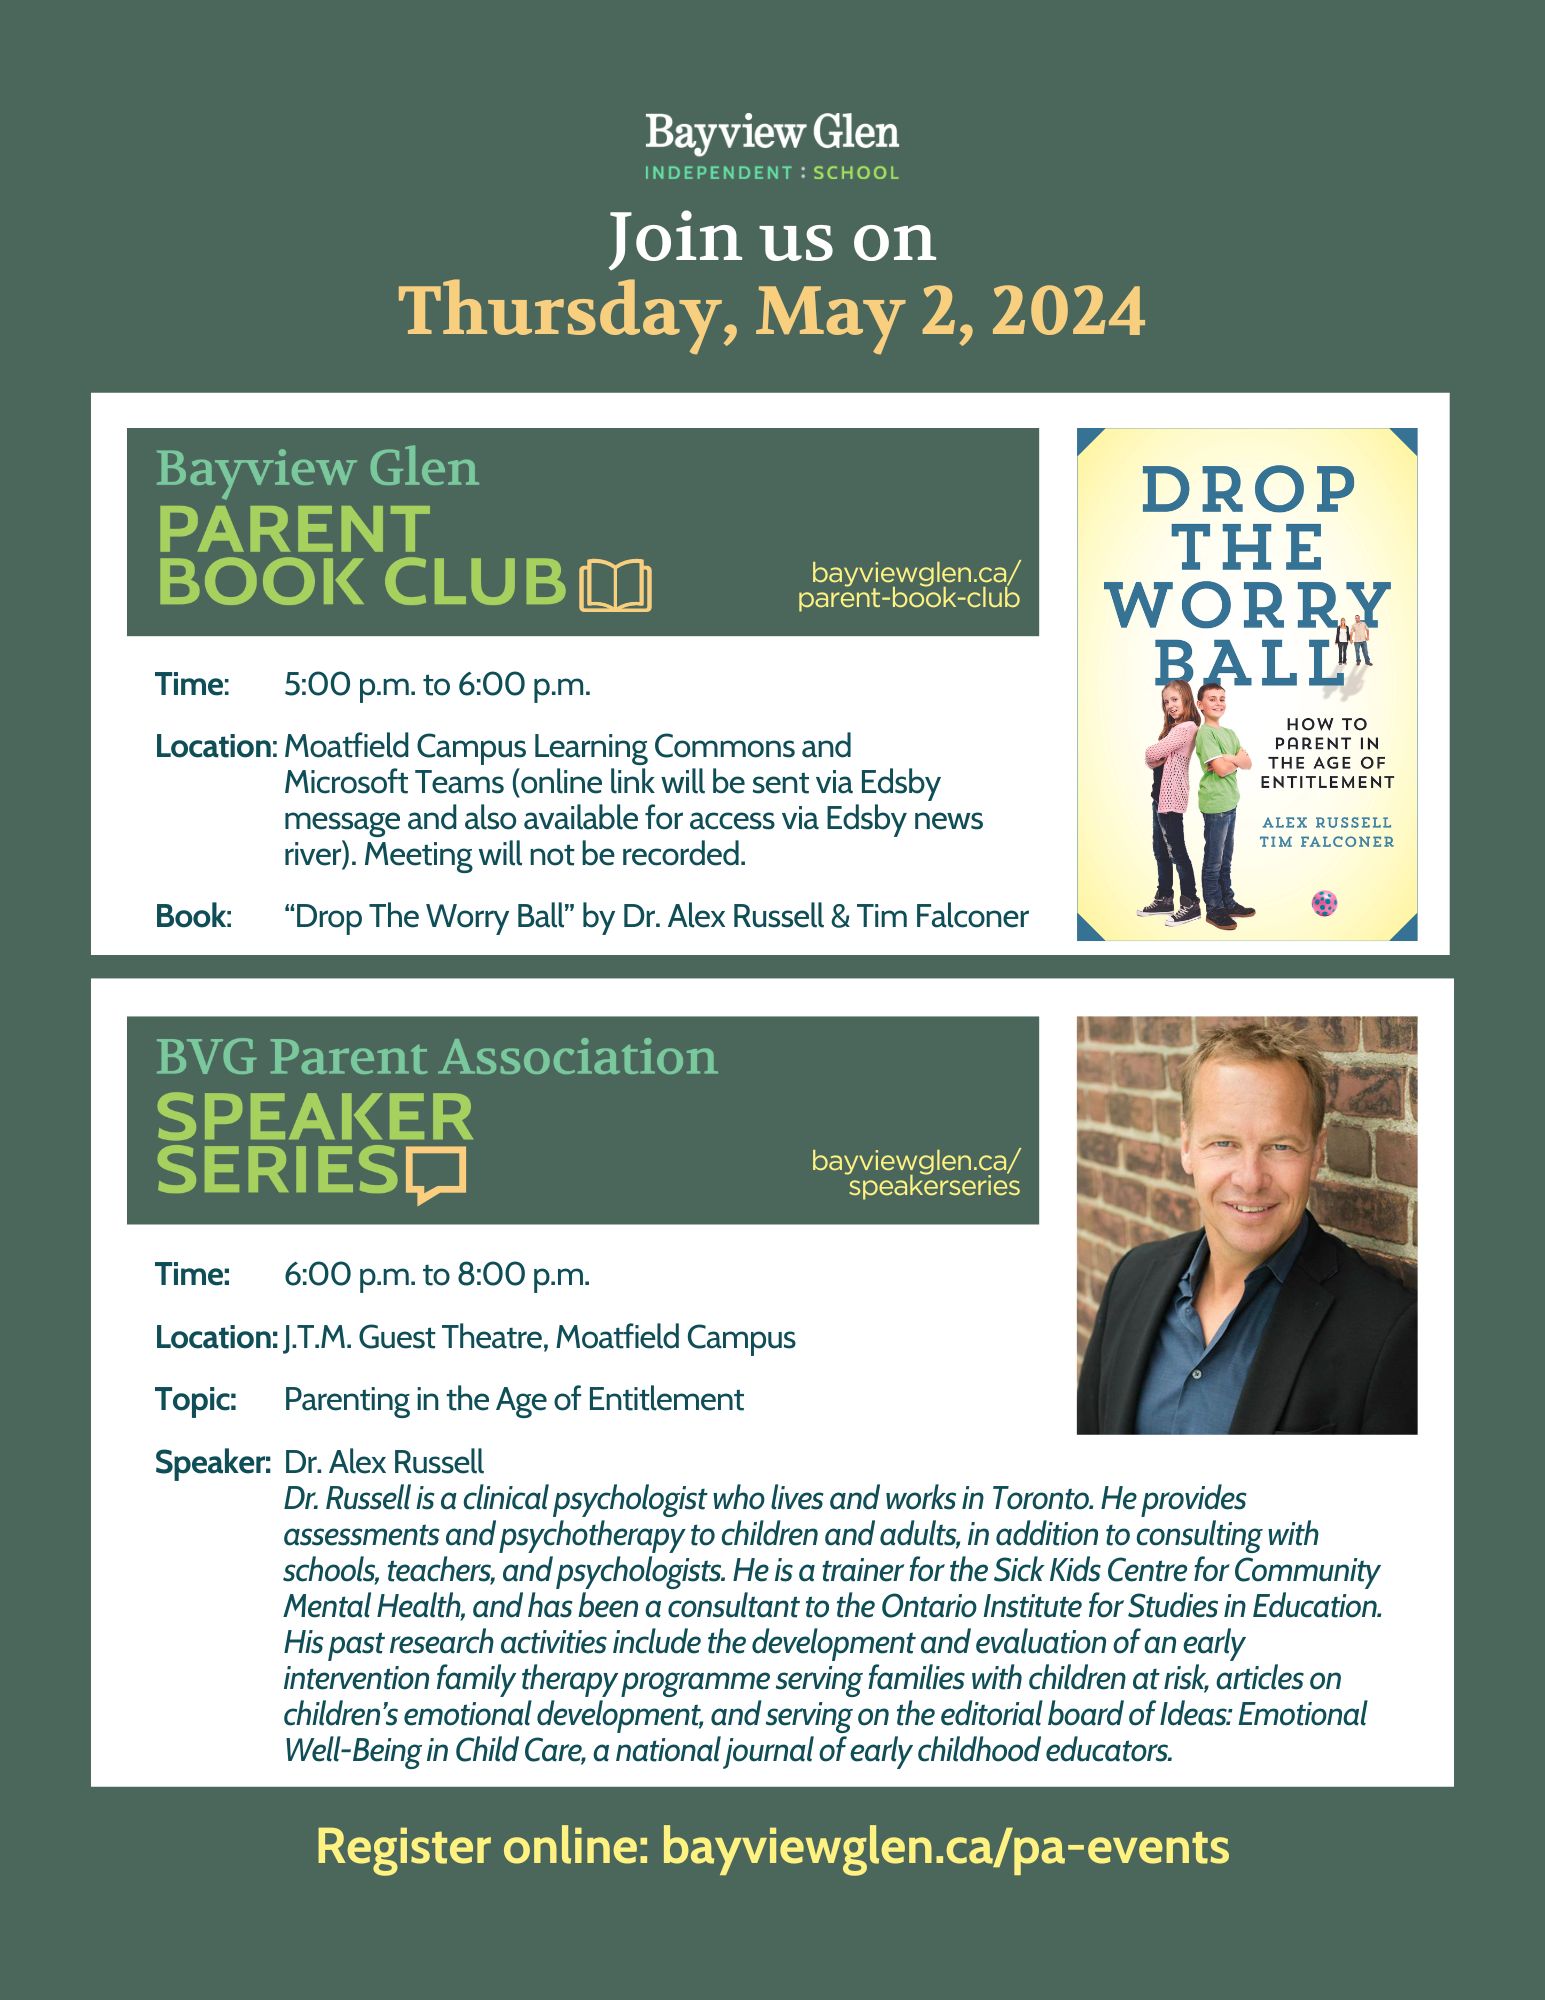 Join us on Thursday, May 2, 2024 for Bayview Glen Parent Book Club and Parent Association Speaker Series with Dr. Alex Russell